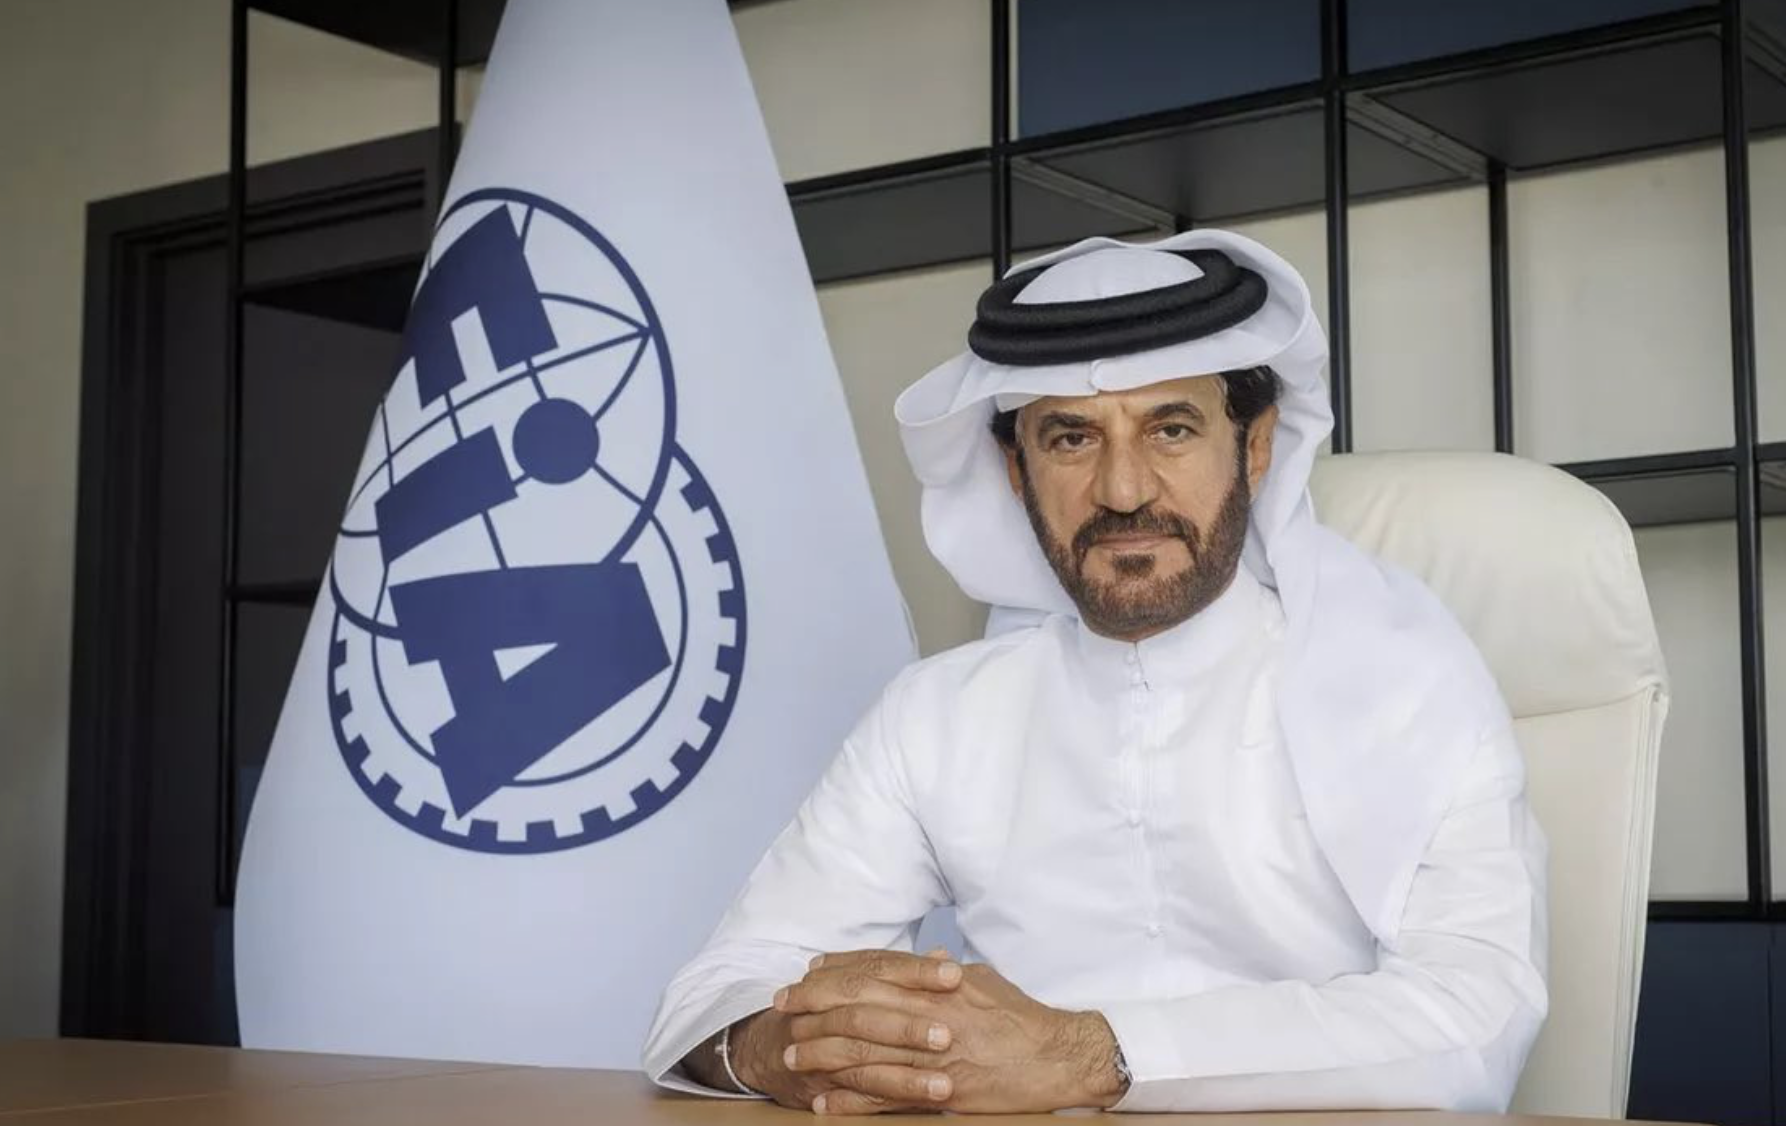 ‘I have nothing to hide’ declares FIA boss Mohammed Ben Sulayem after being cleared of accusations